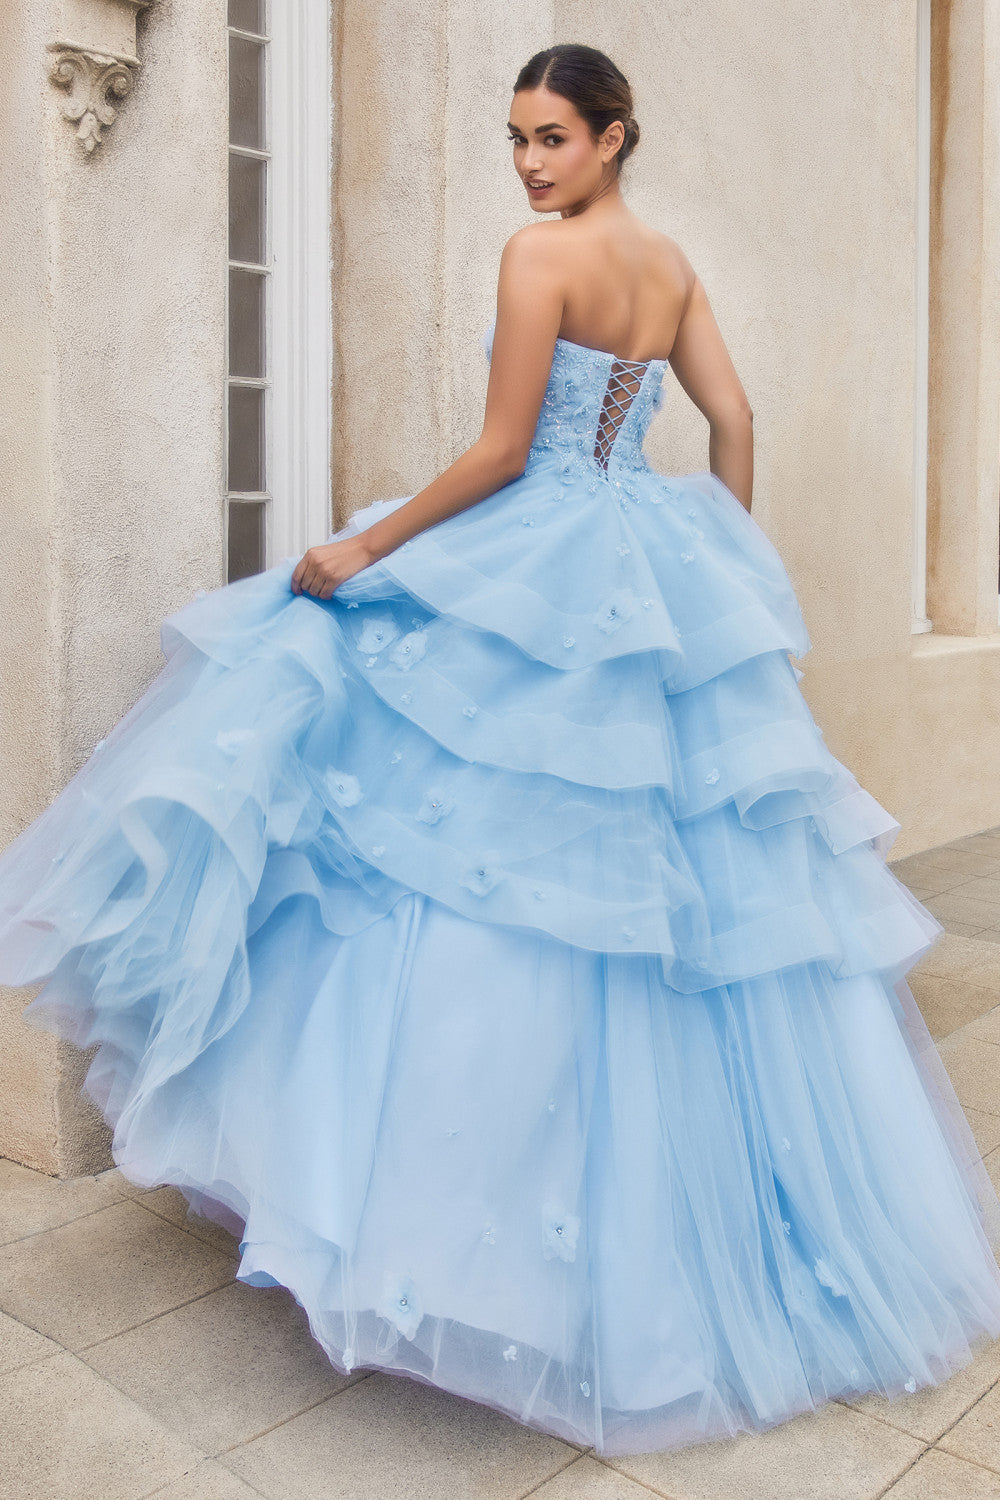 Couture layered ball gow-smcdress